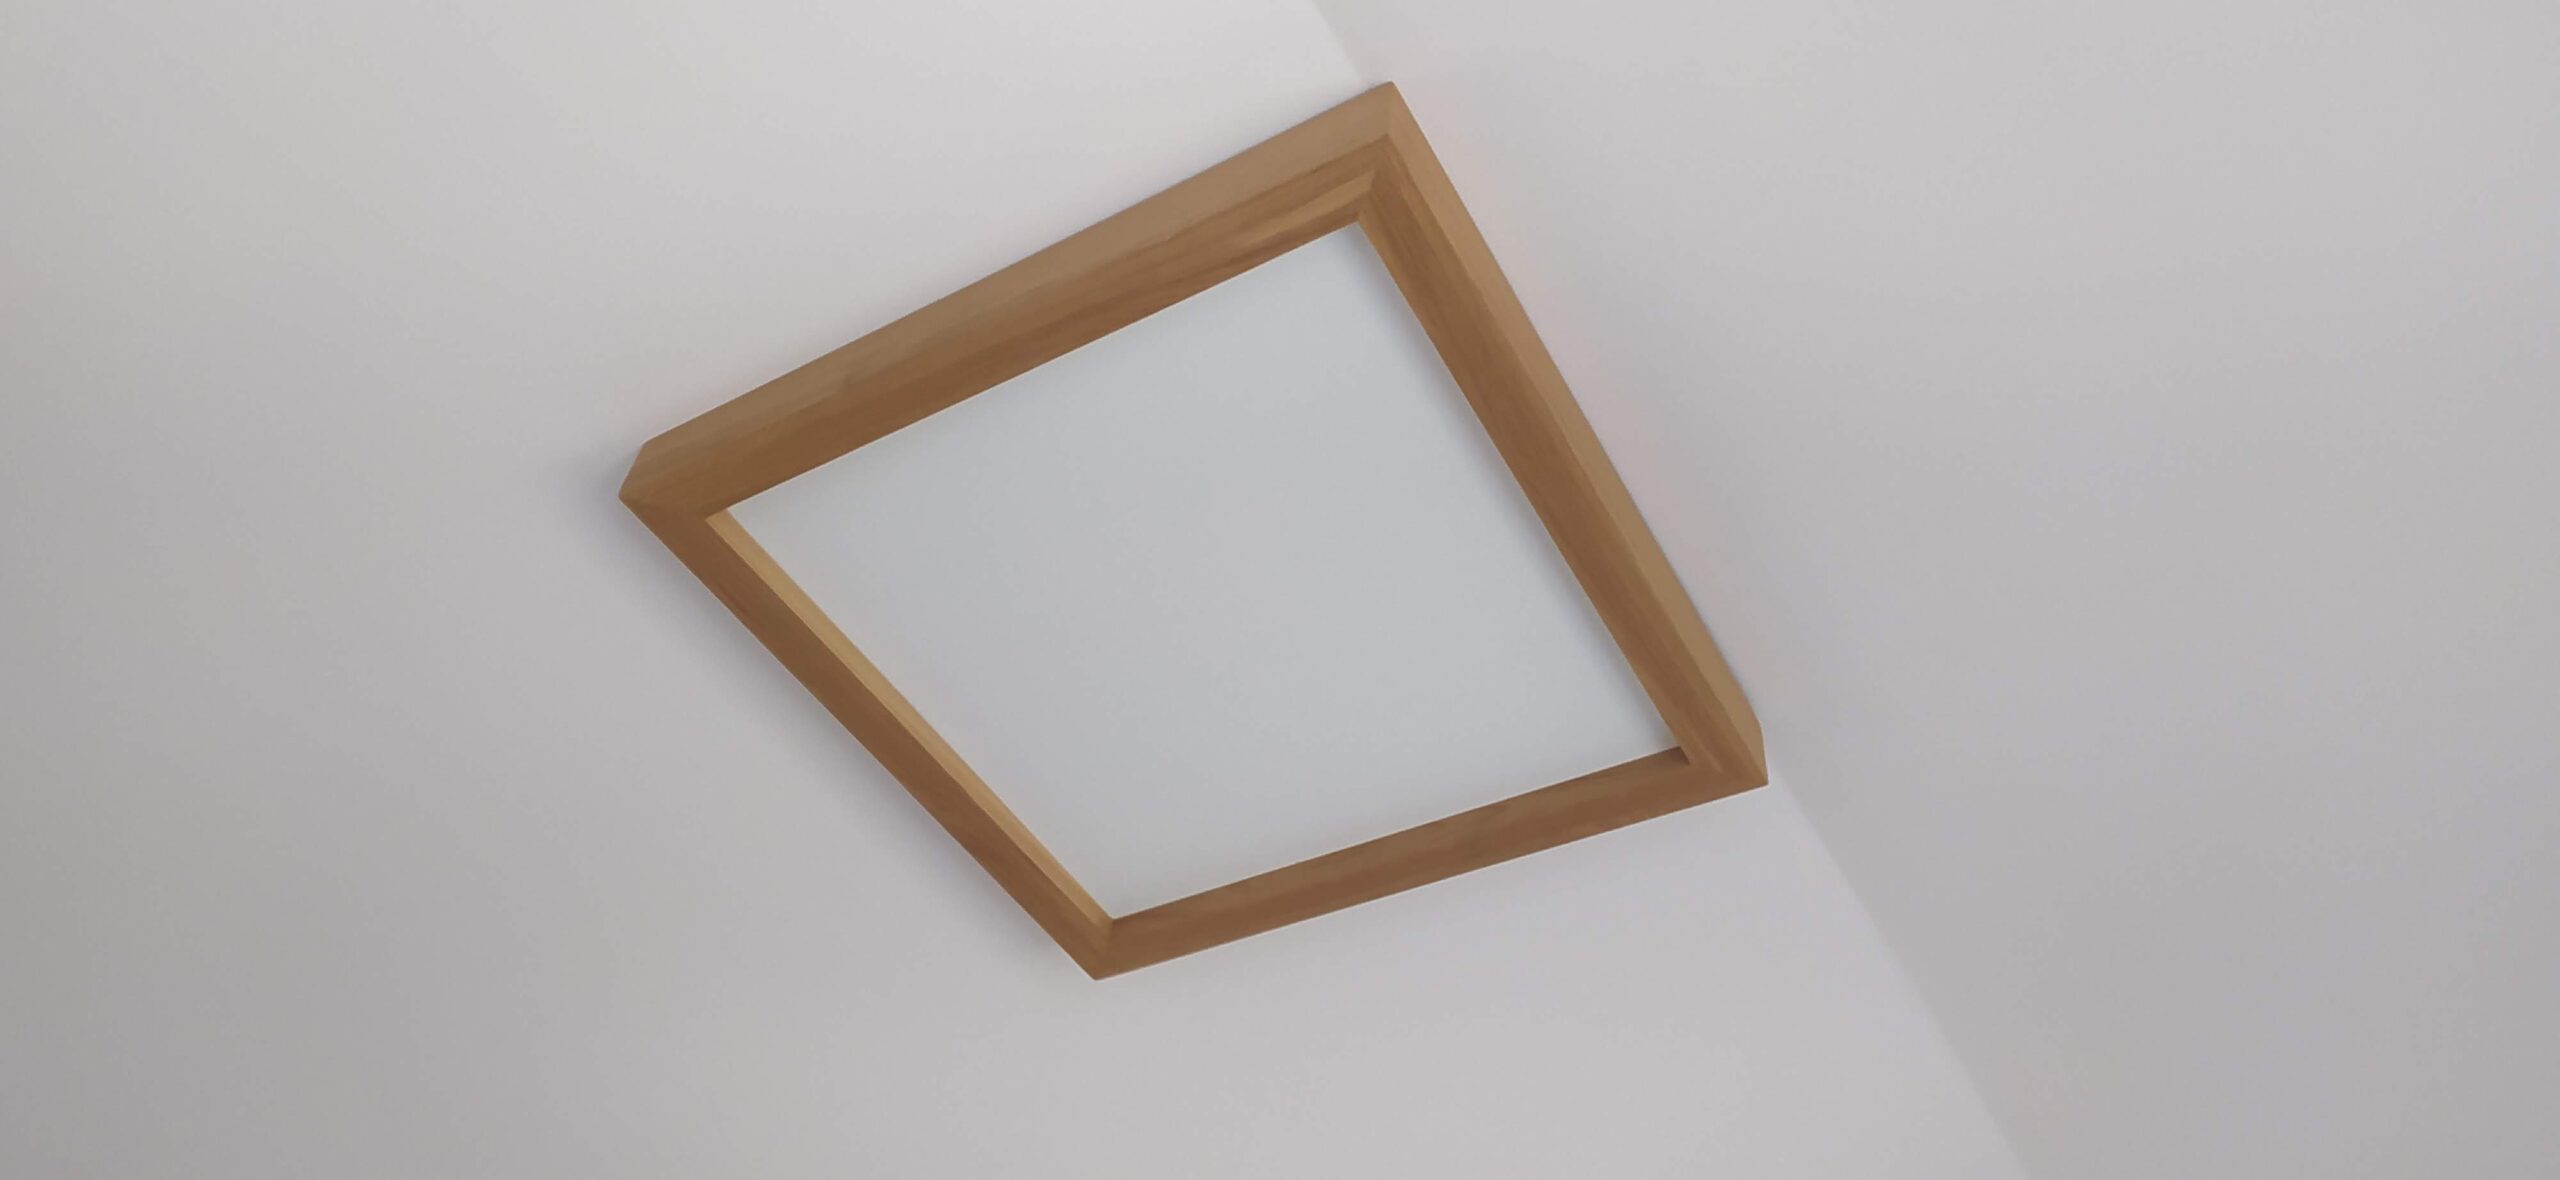 Wooden lamp LED panel 60x60 cm Slim FLORENCE ceiling lamp housing natural wood Armstrong